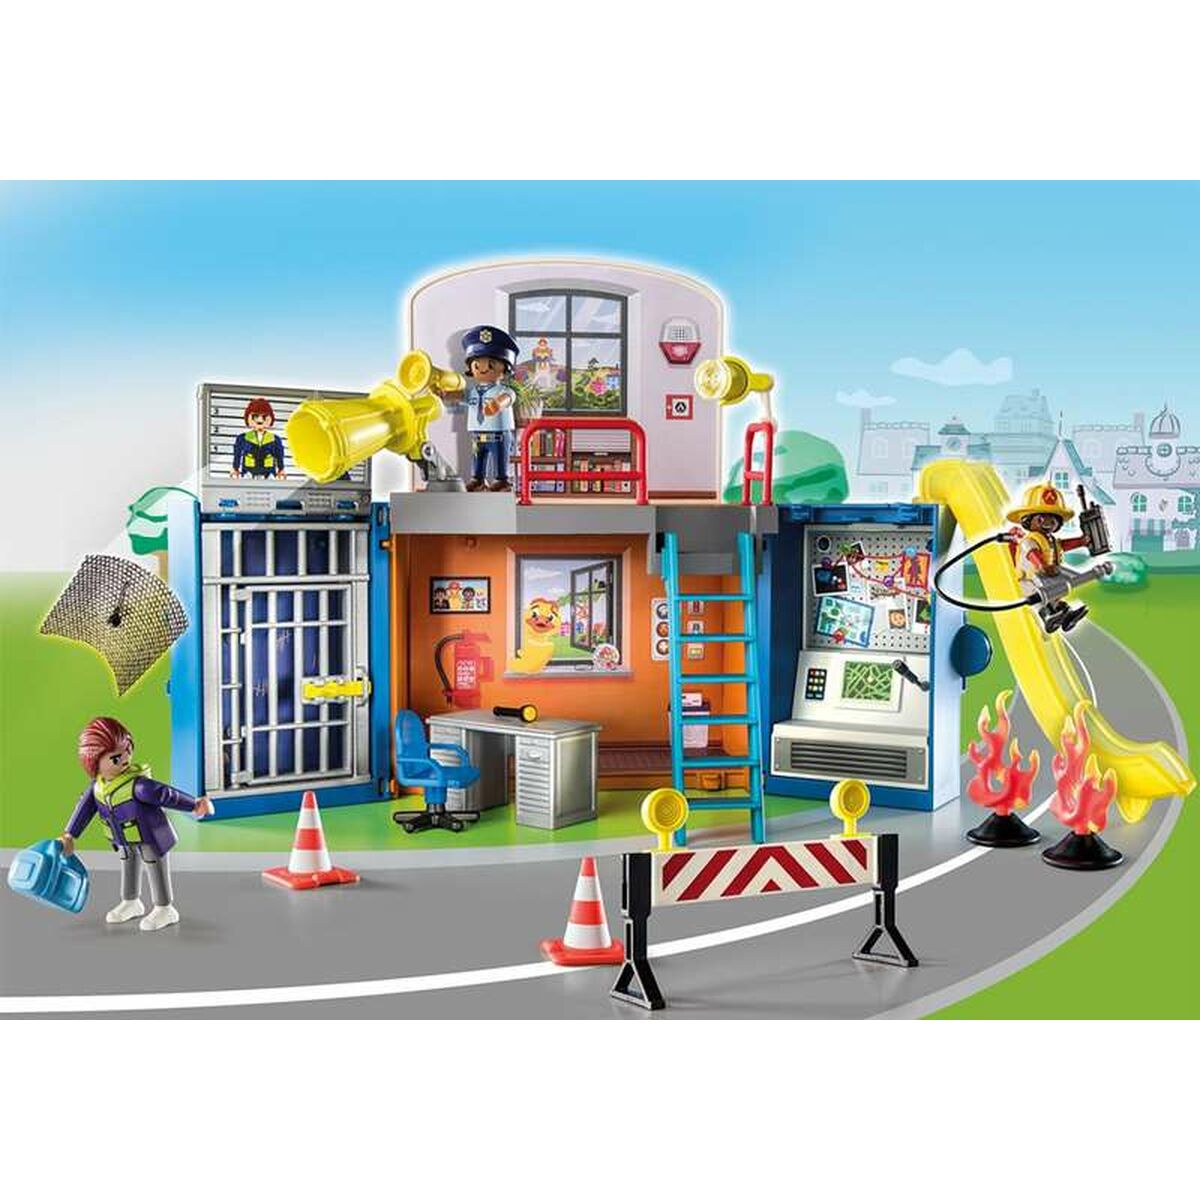 Playset Playmobil Duck on Call Police Officer Base station 70830 (70 pcs) - Little Baby Shop